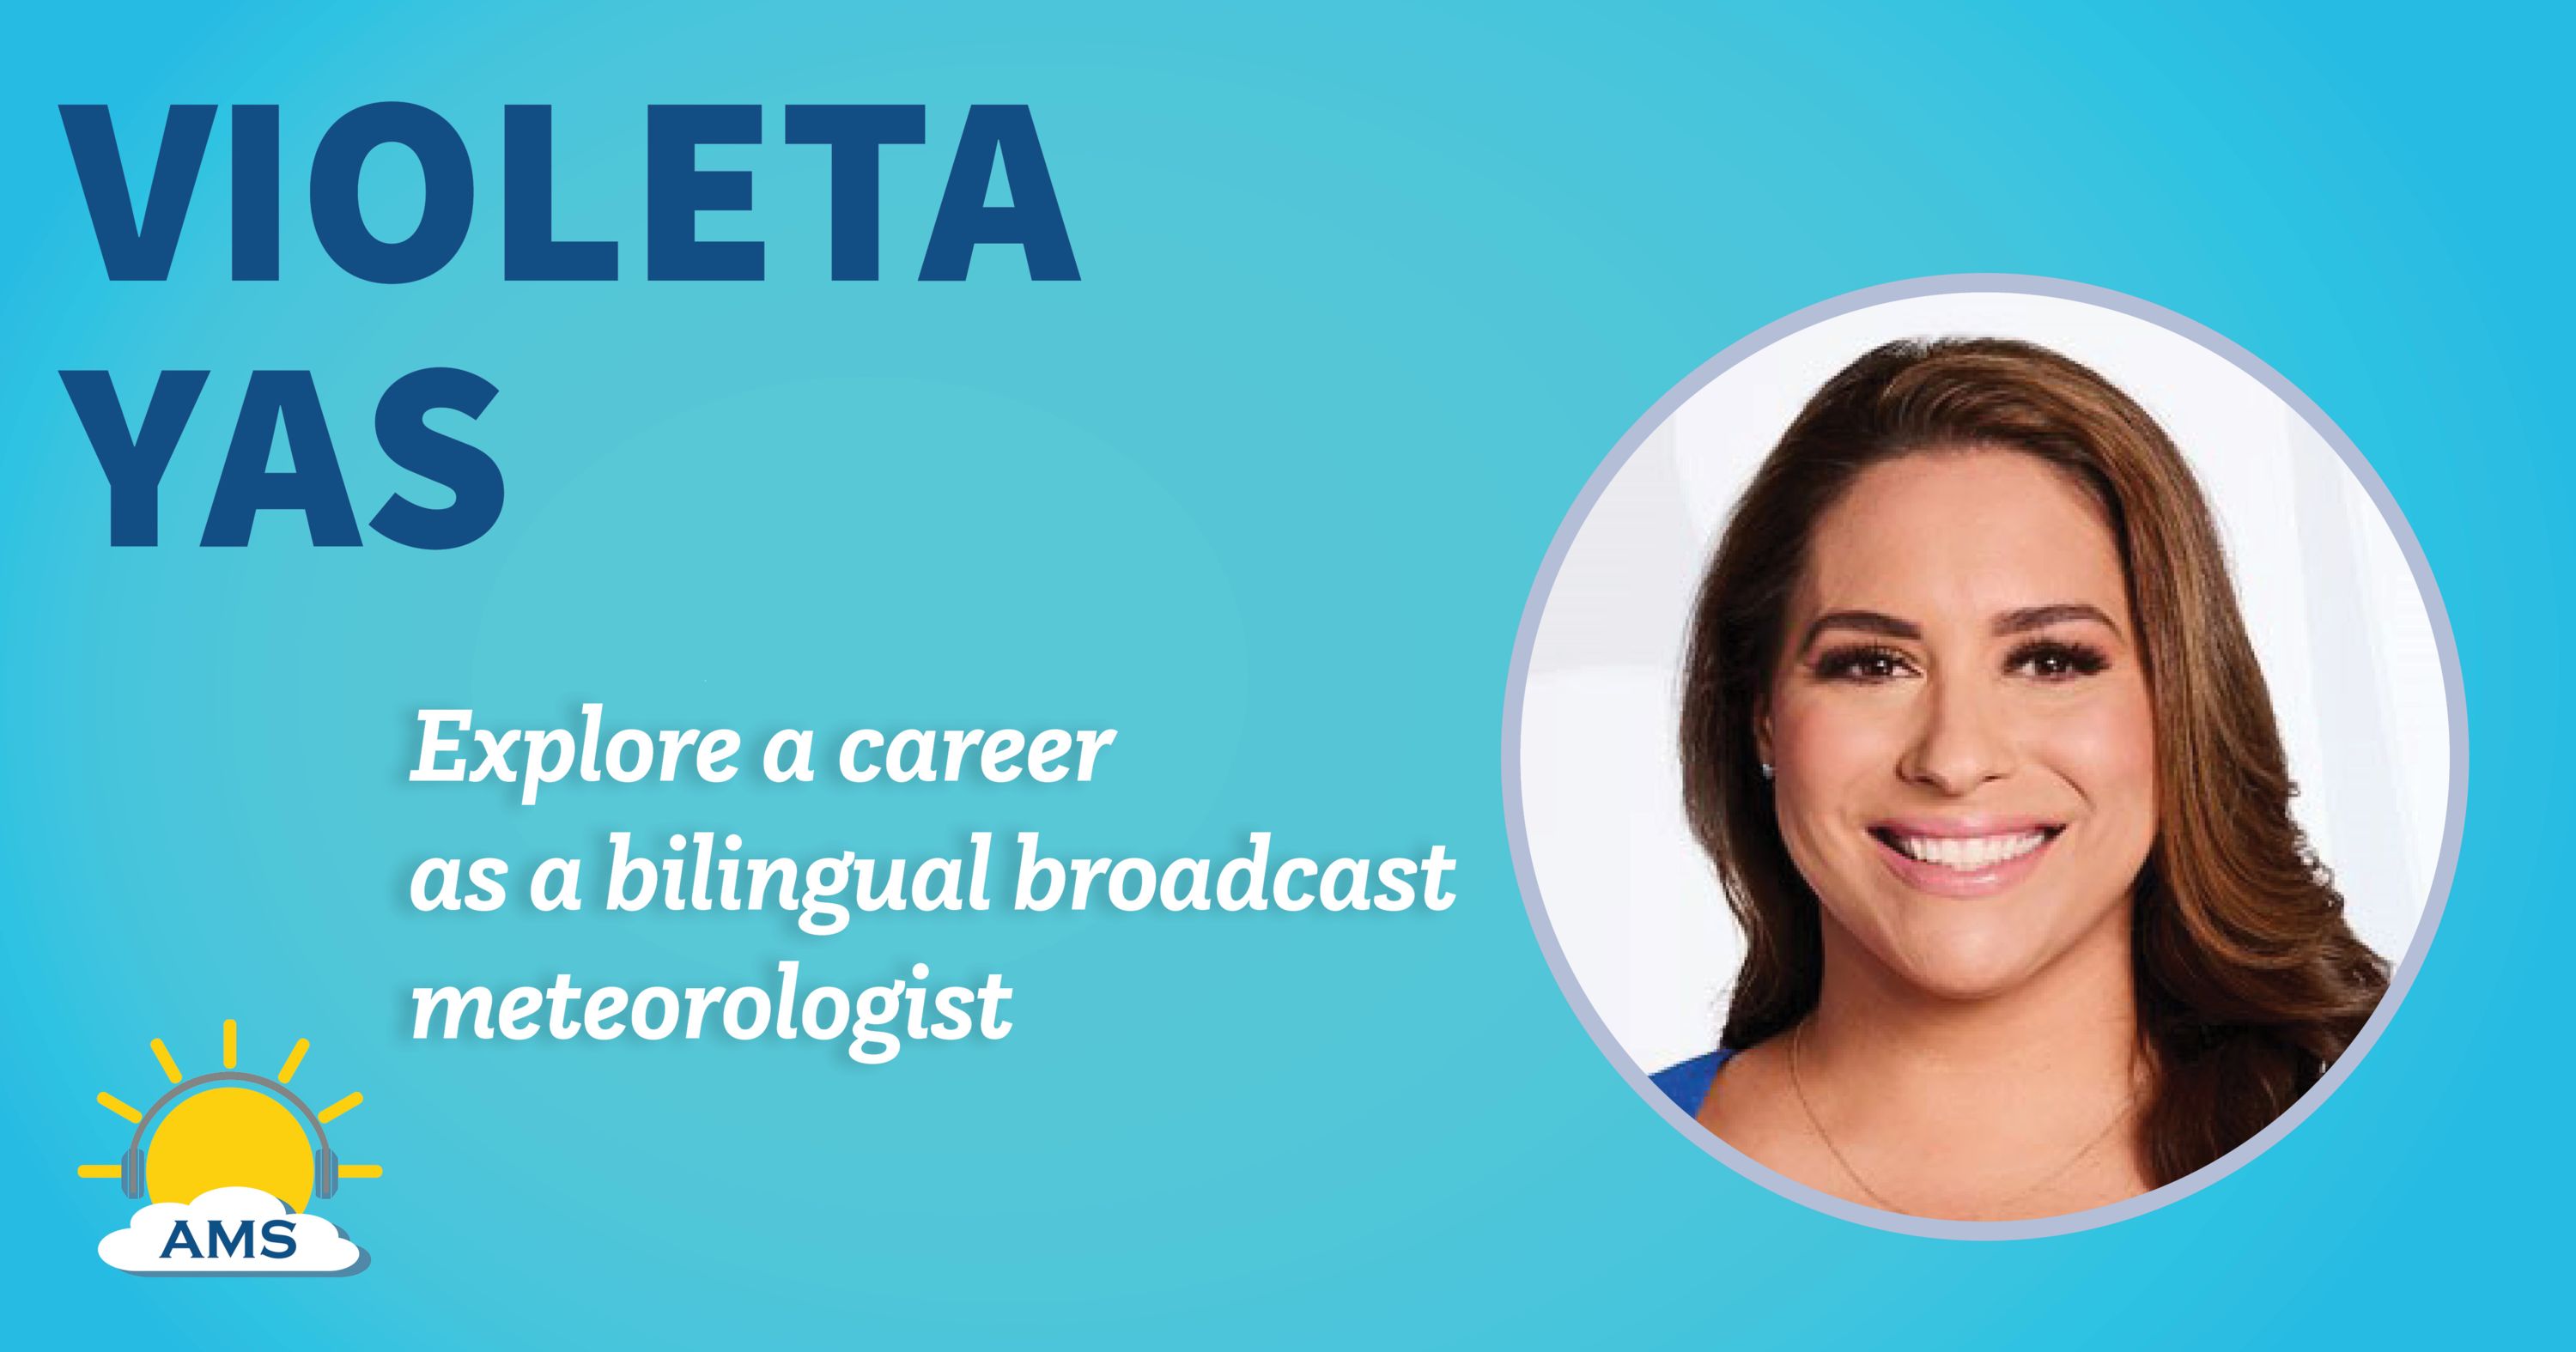 Violeta Yas headshot graphic with teaser text that reads "explore a career in bilingual broadcast meteorology "